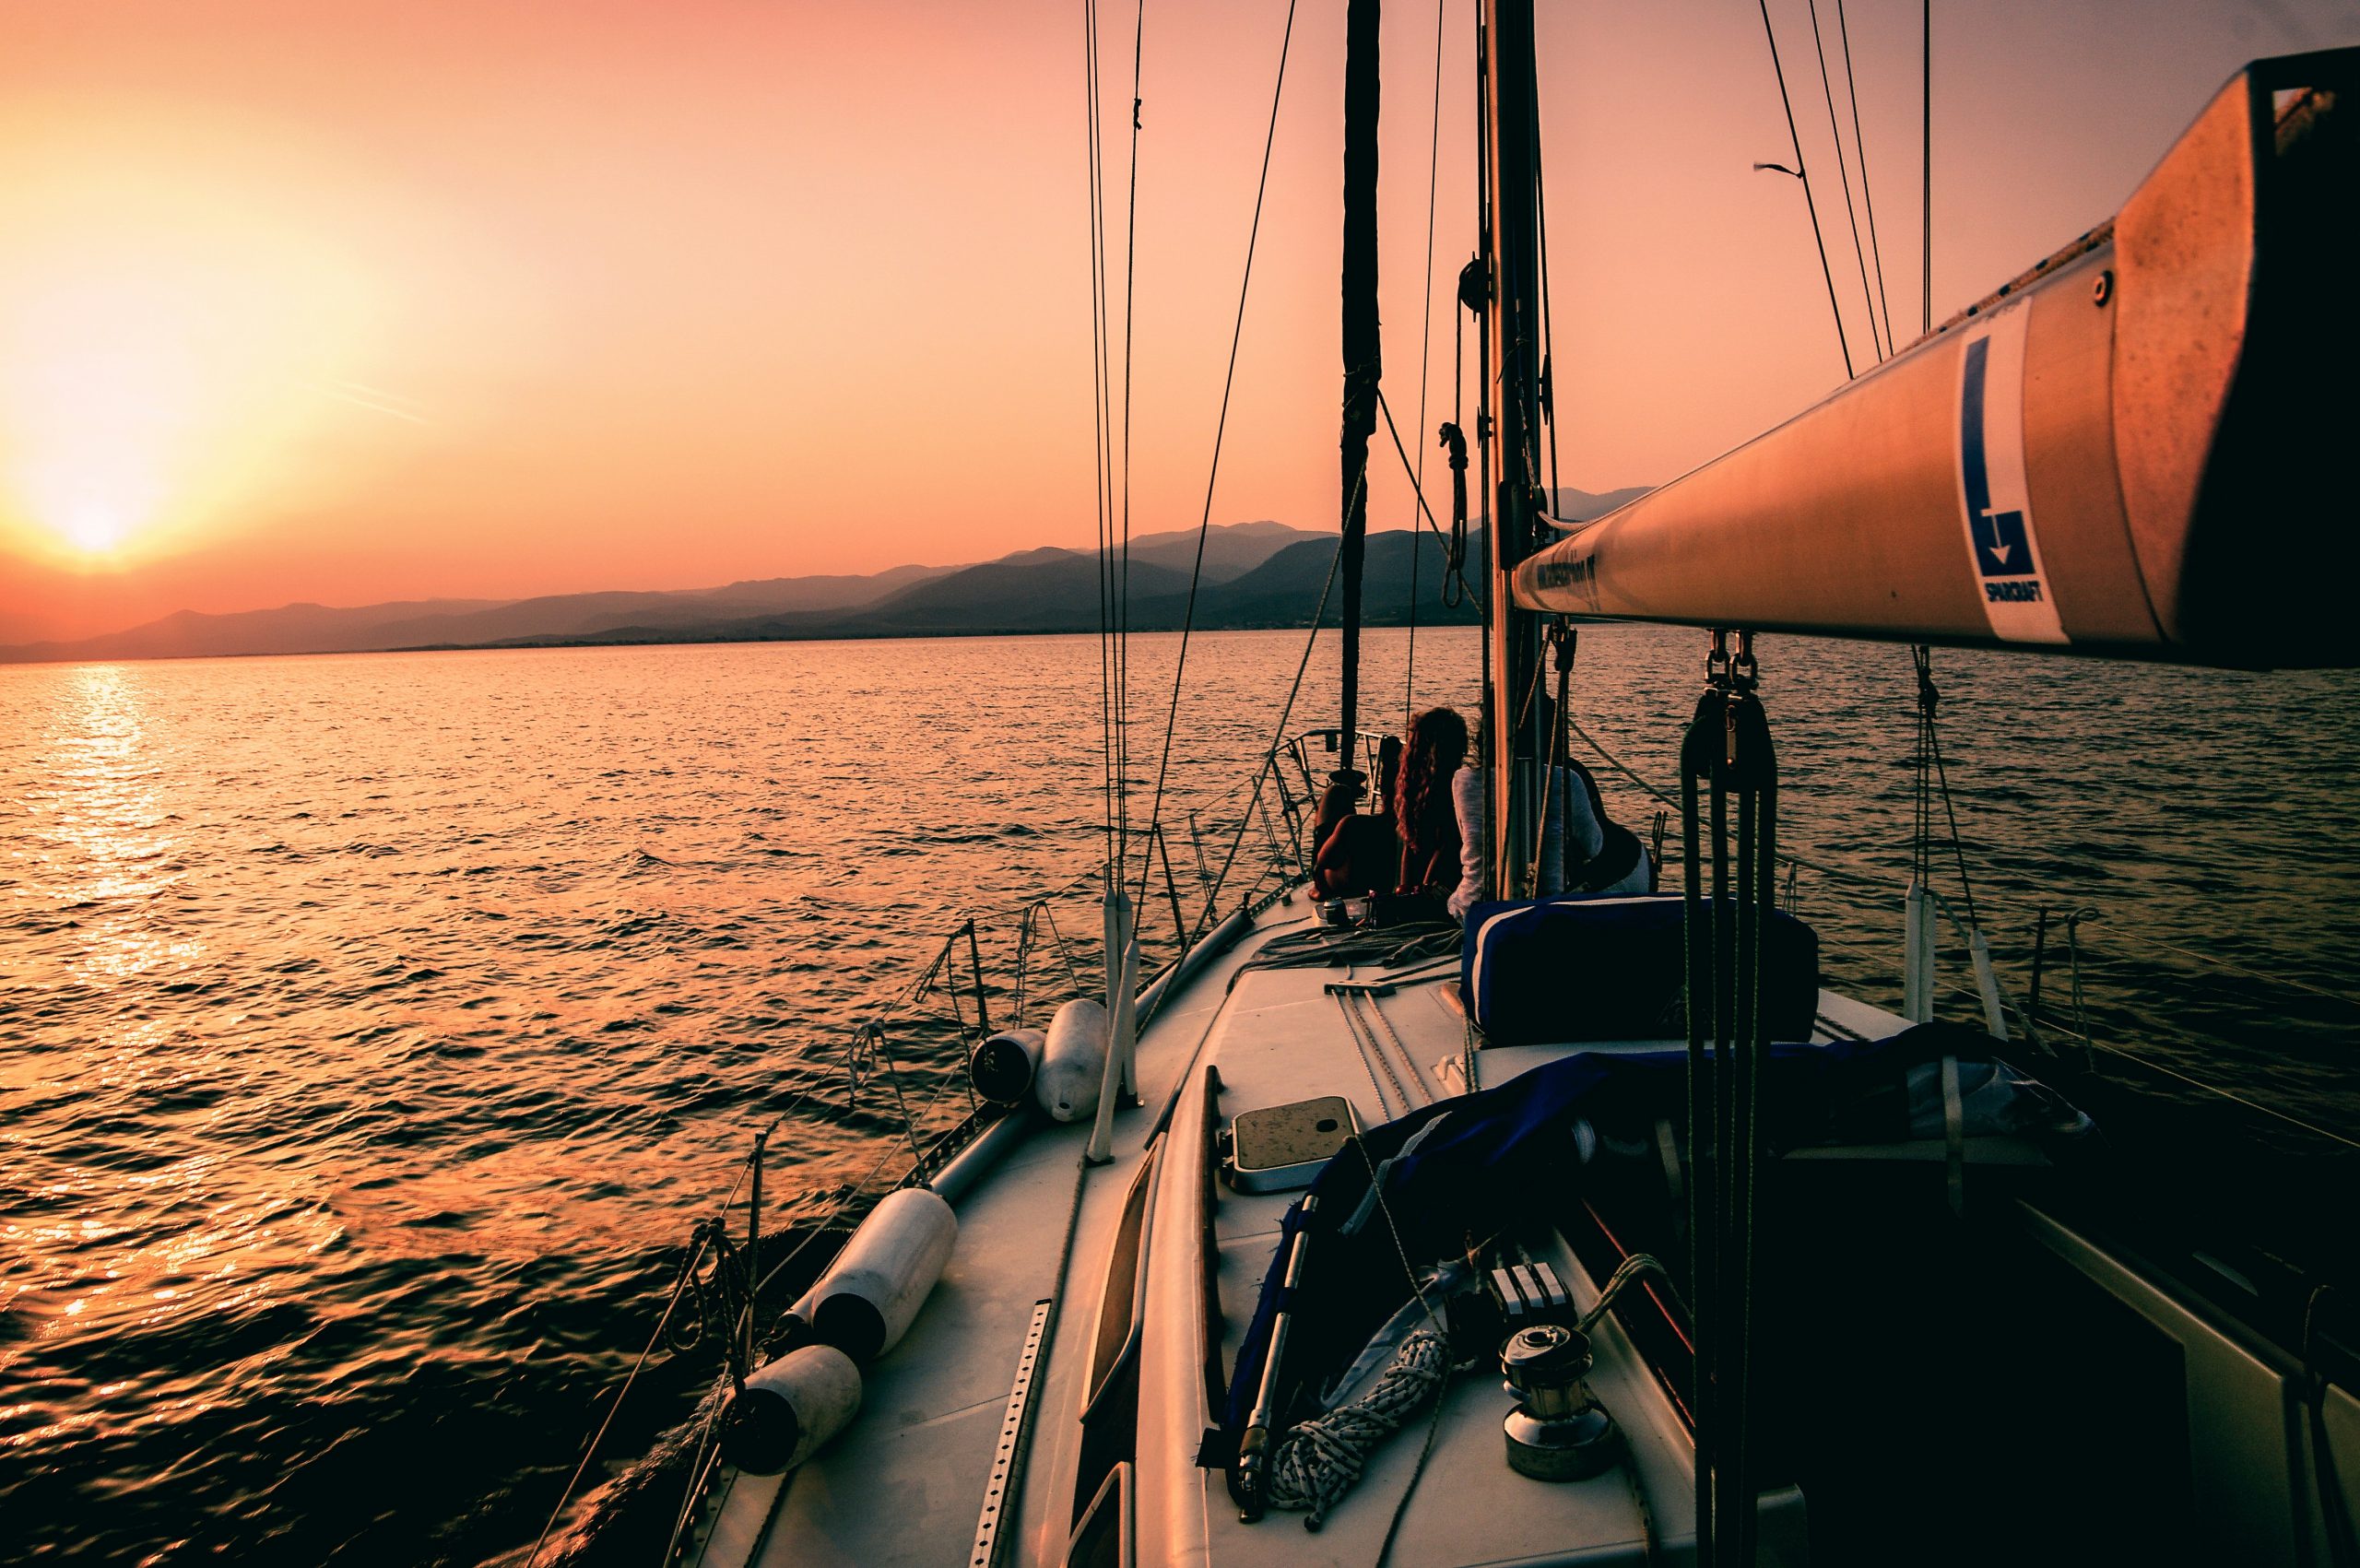 explore the world of sailing with our comprehensive guides and tips. learn how to sail, find the best sailing destinations, and enhance your sailing skills.